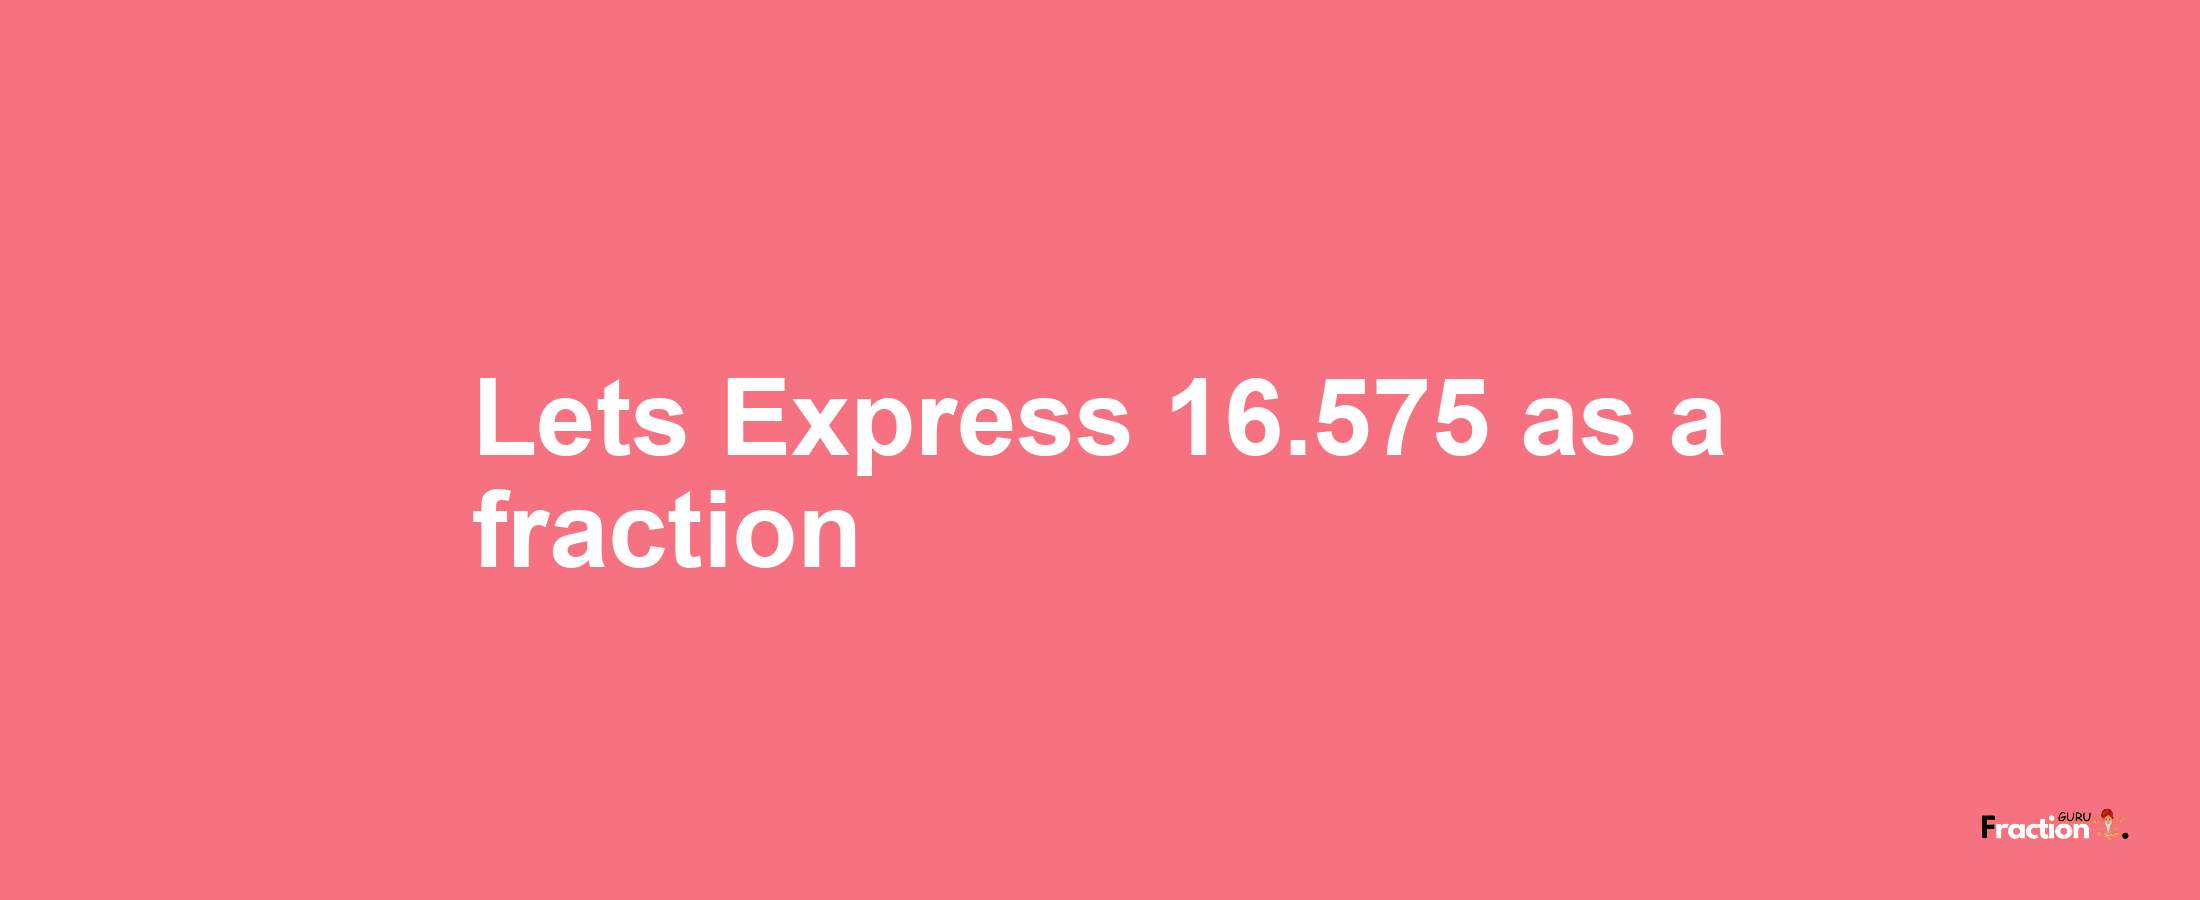 Lets Express 16.575 as afraction